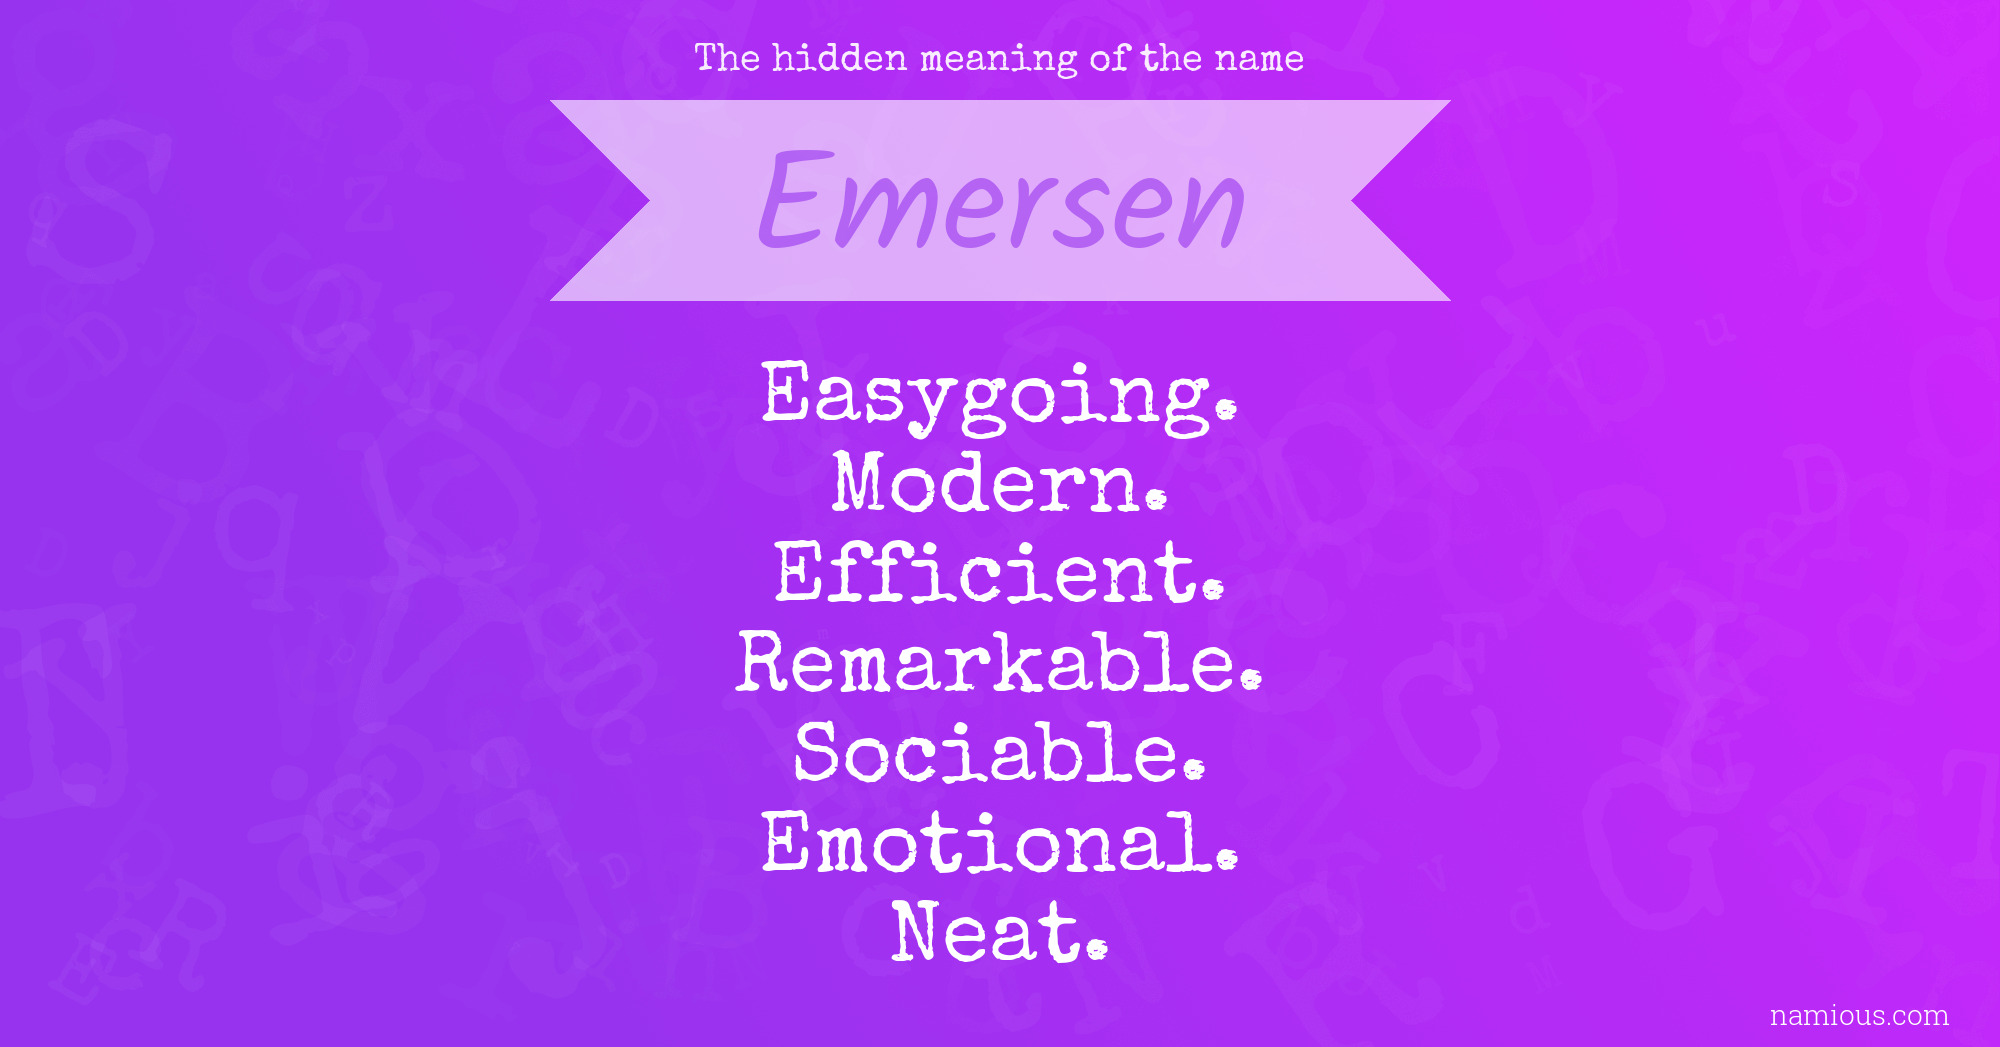 The hidden meaning of the name Emersen